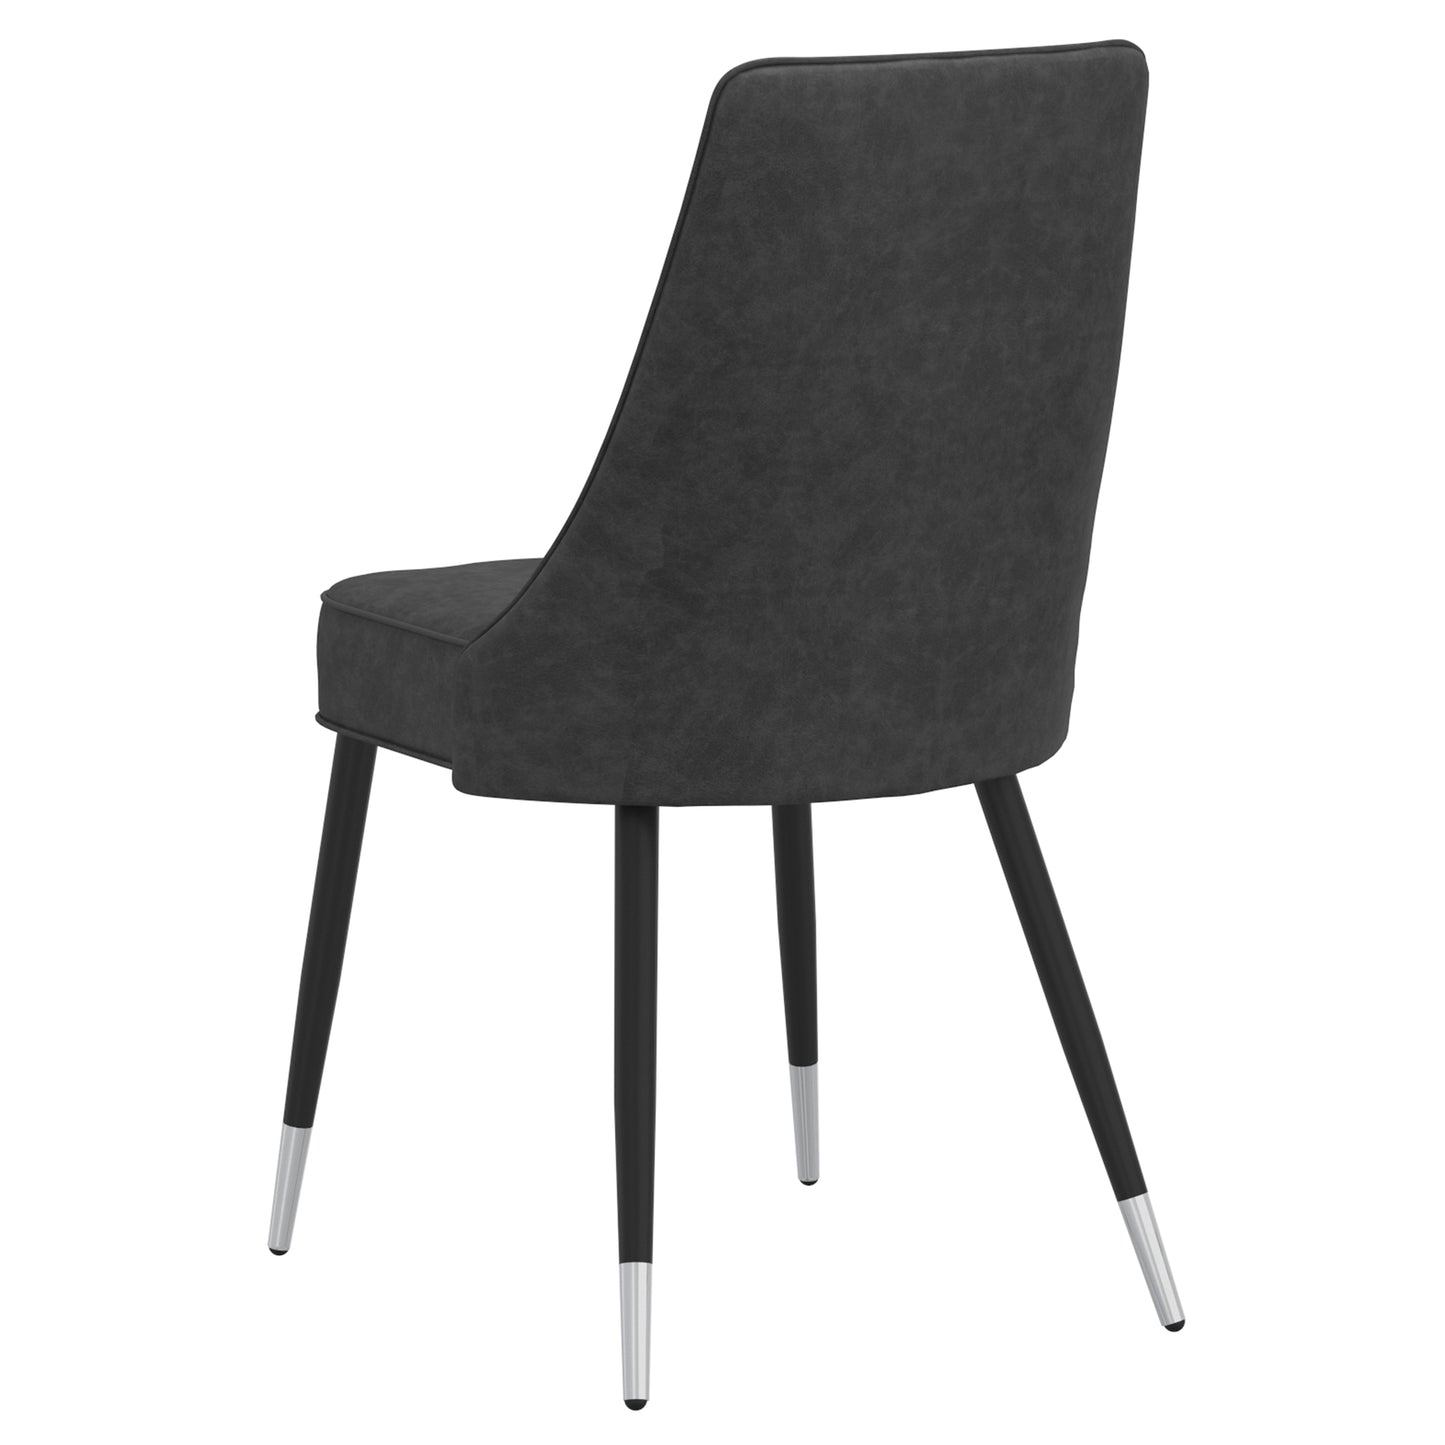 Silvano Side Chair, Set of 2 in Vintage Grey and Black